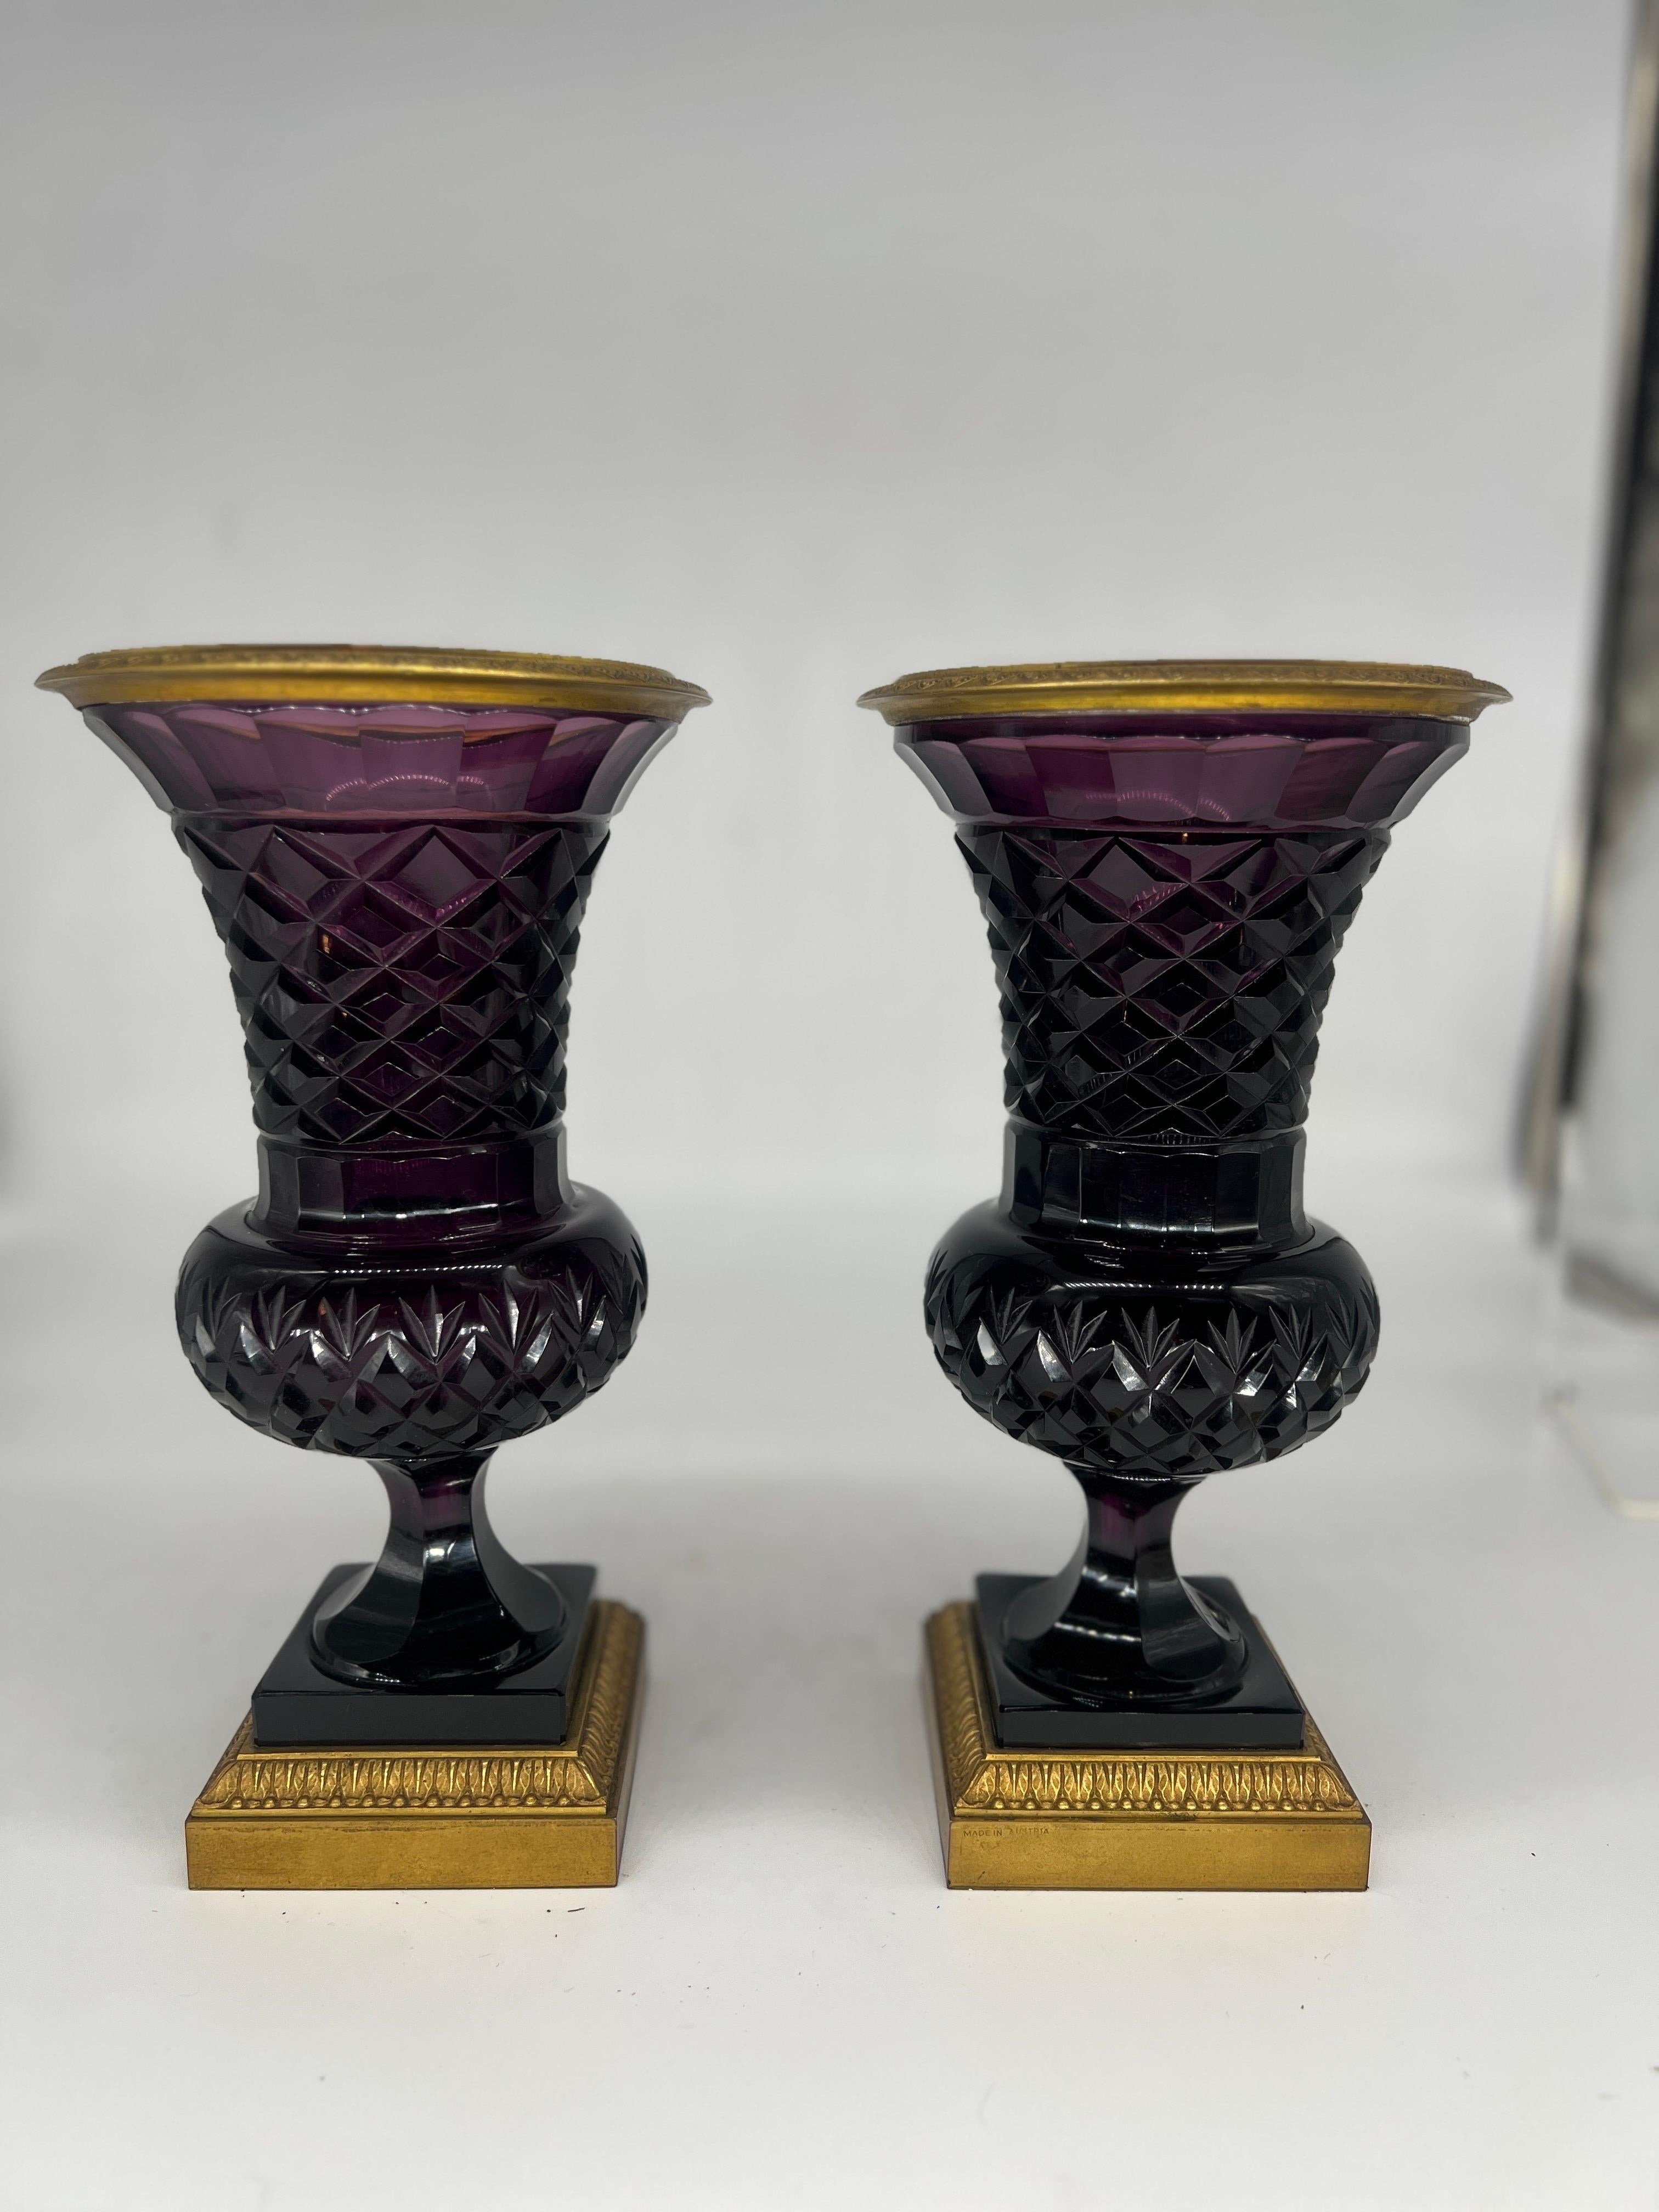 An incredibly fine pair of antique Amethyst cut crystal vases mounted with dore bronze mounts. The vases have delicate faceted detail reminiscent of the Baccarat firm in France which likely supplied these vases. The base is marked 